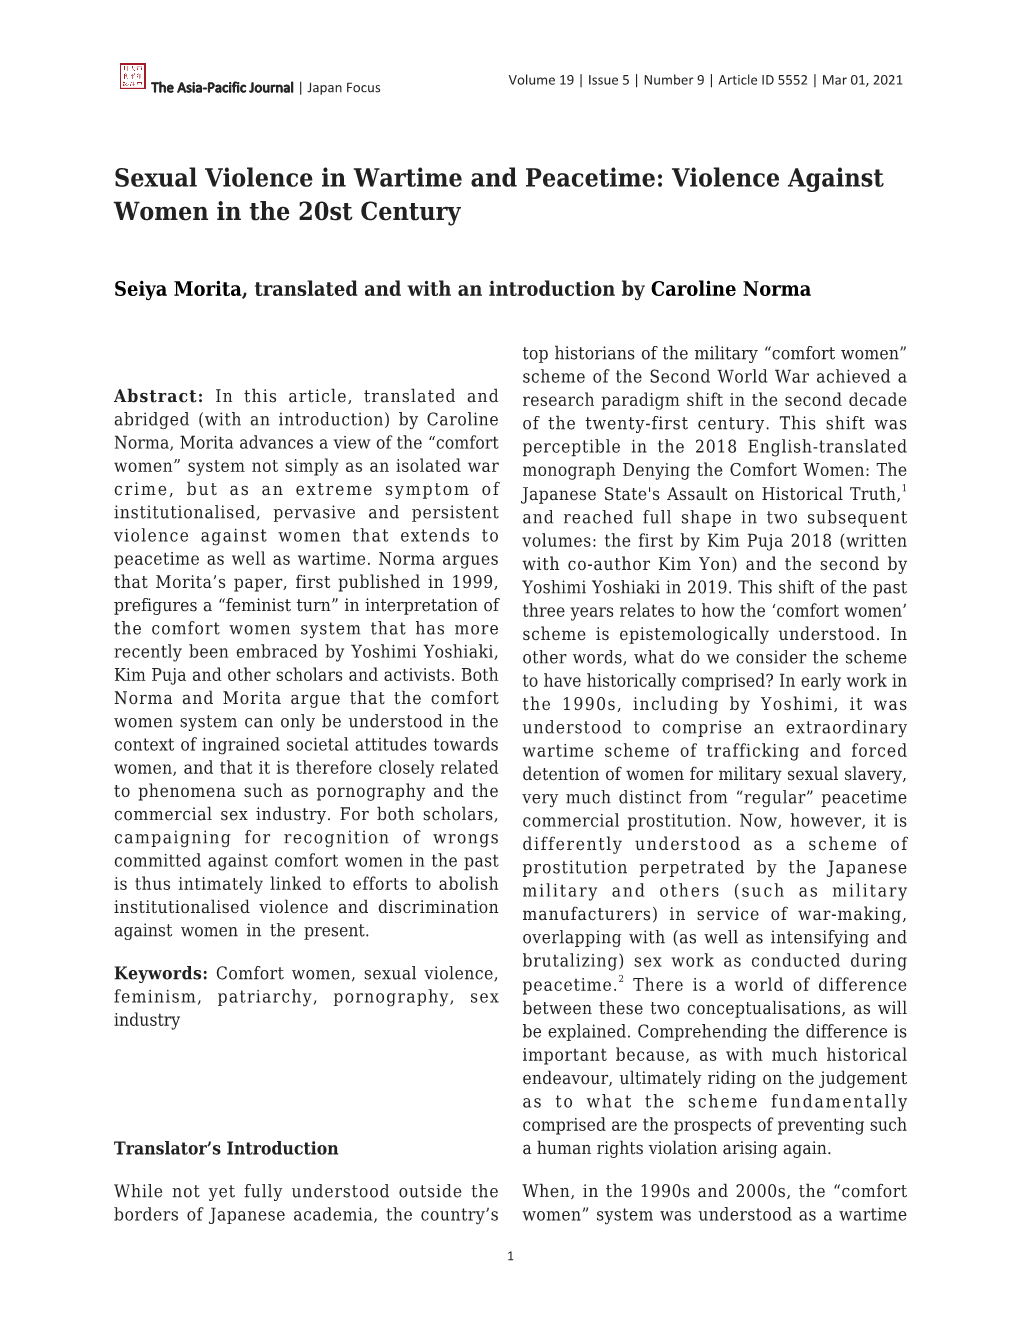 Sexual Violence in Wartime and Peacetime: Violence Against Women in the 20St Century